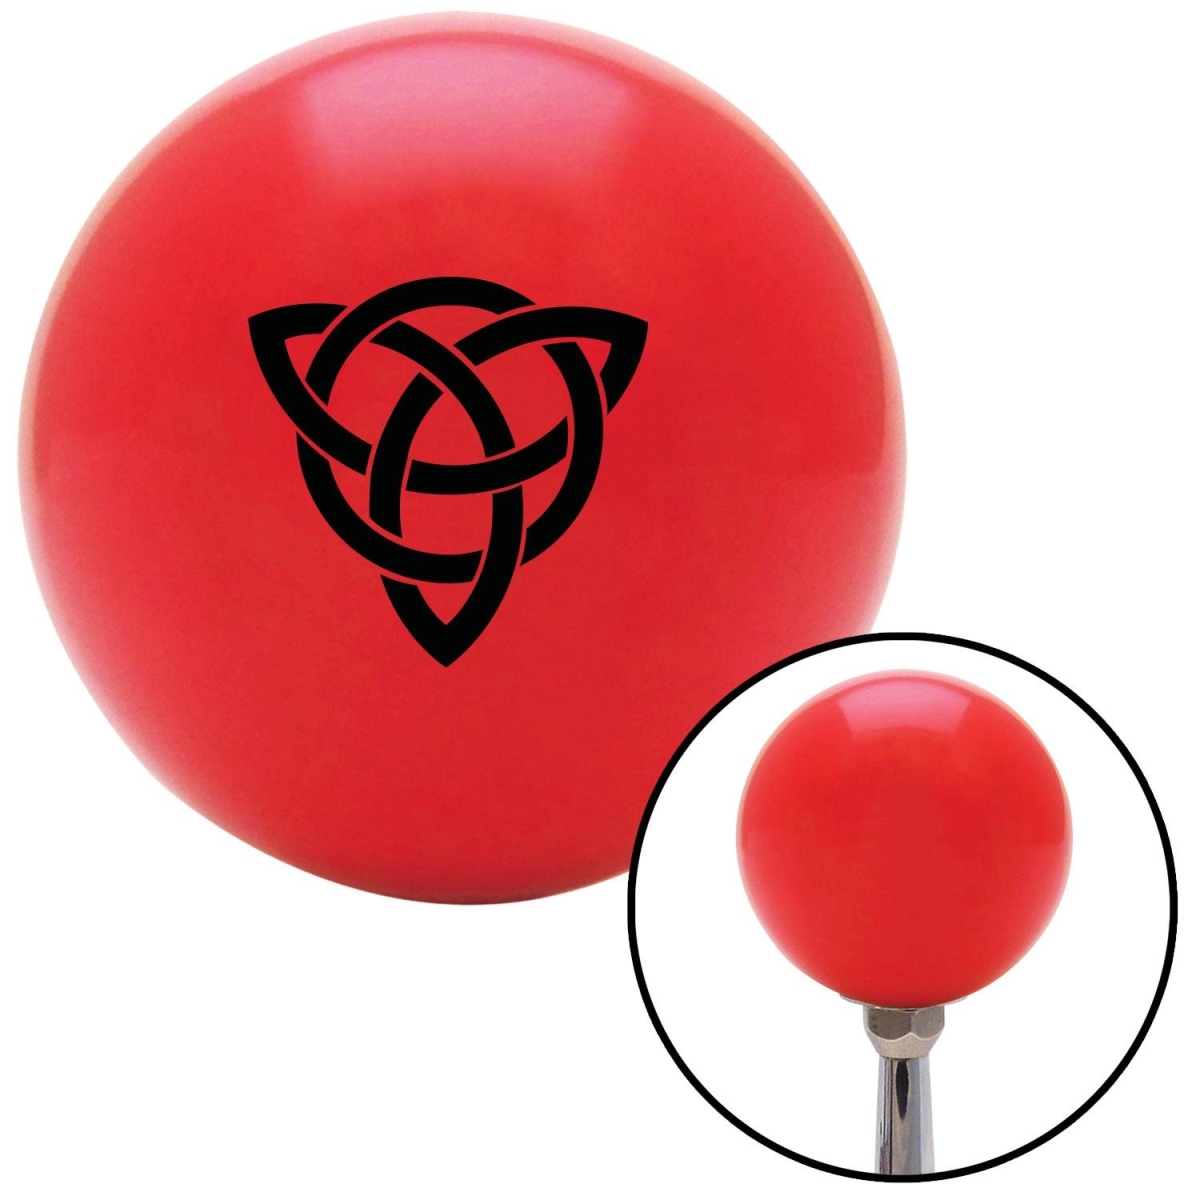 Picture of American Shifter 101579 Black Celtic Design No.2 Red Shift Knob with M16 x 1.5 Insert Shifter Auto Manual